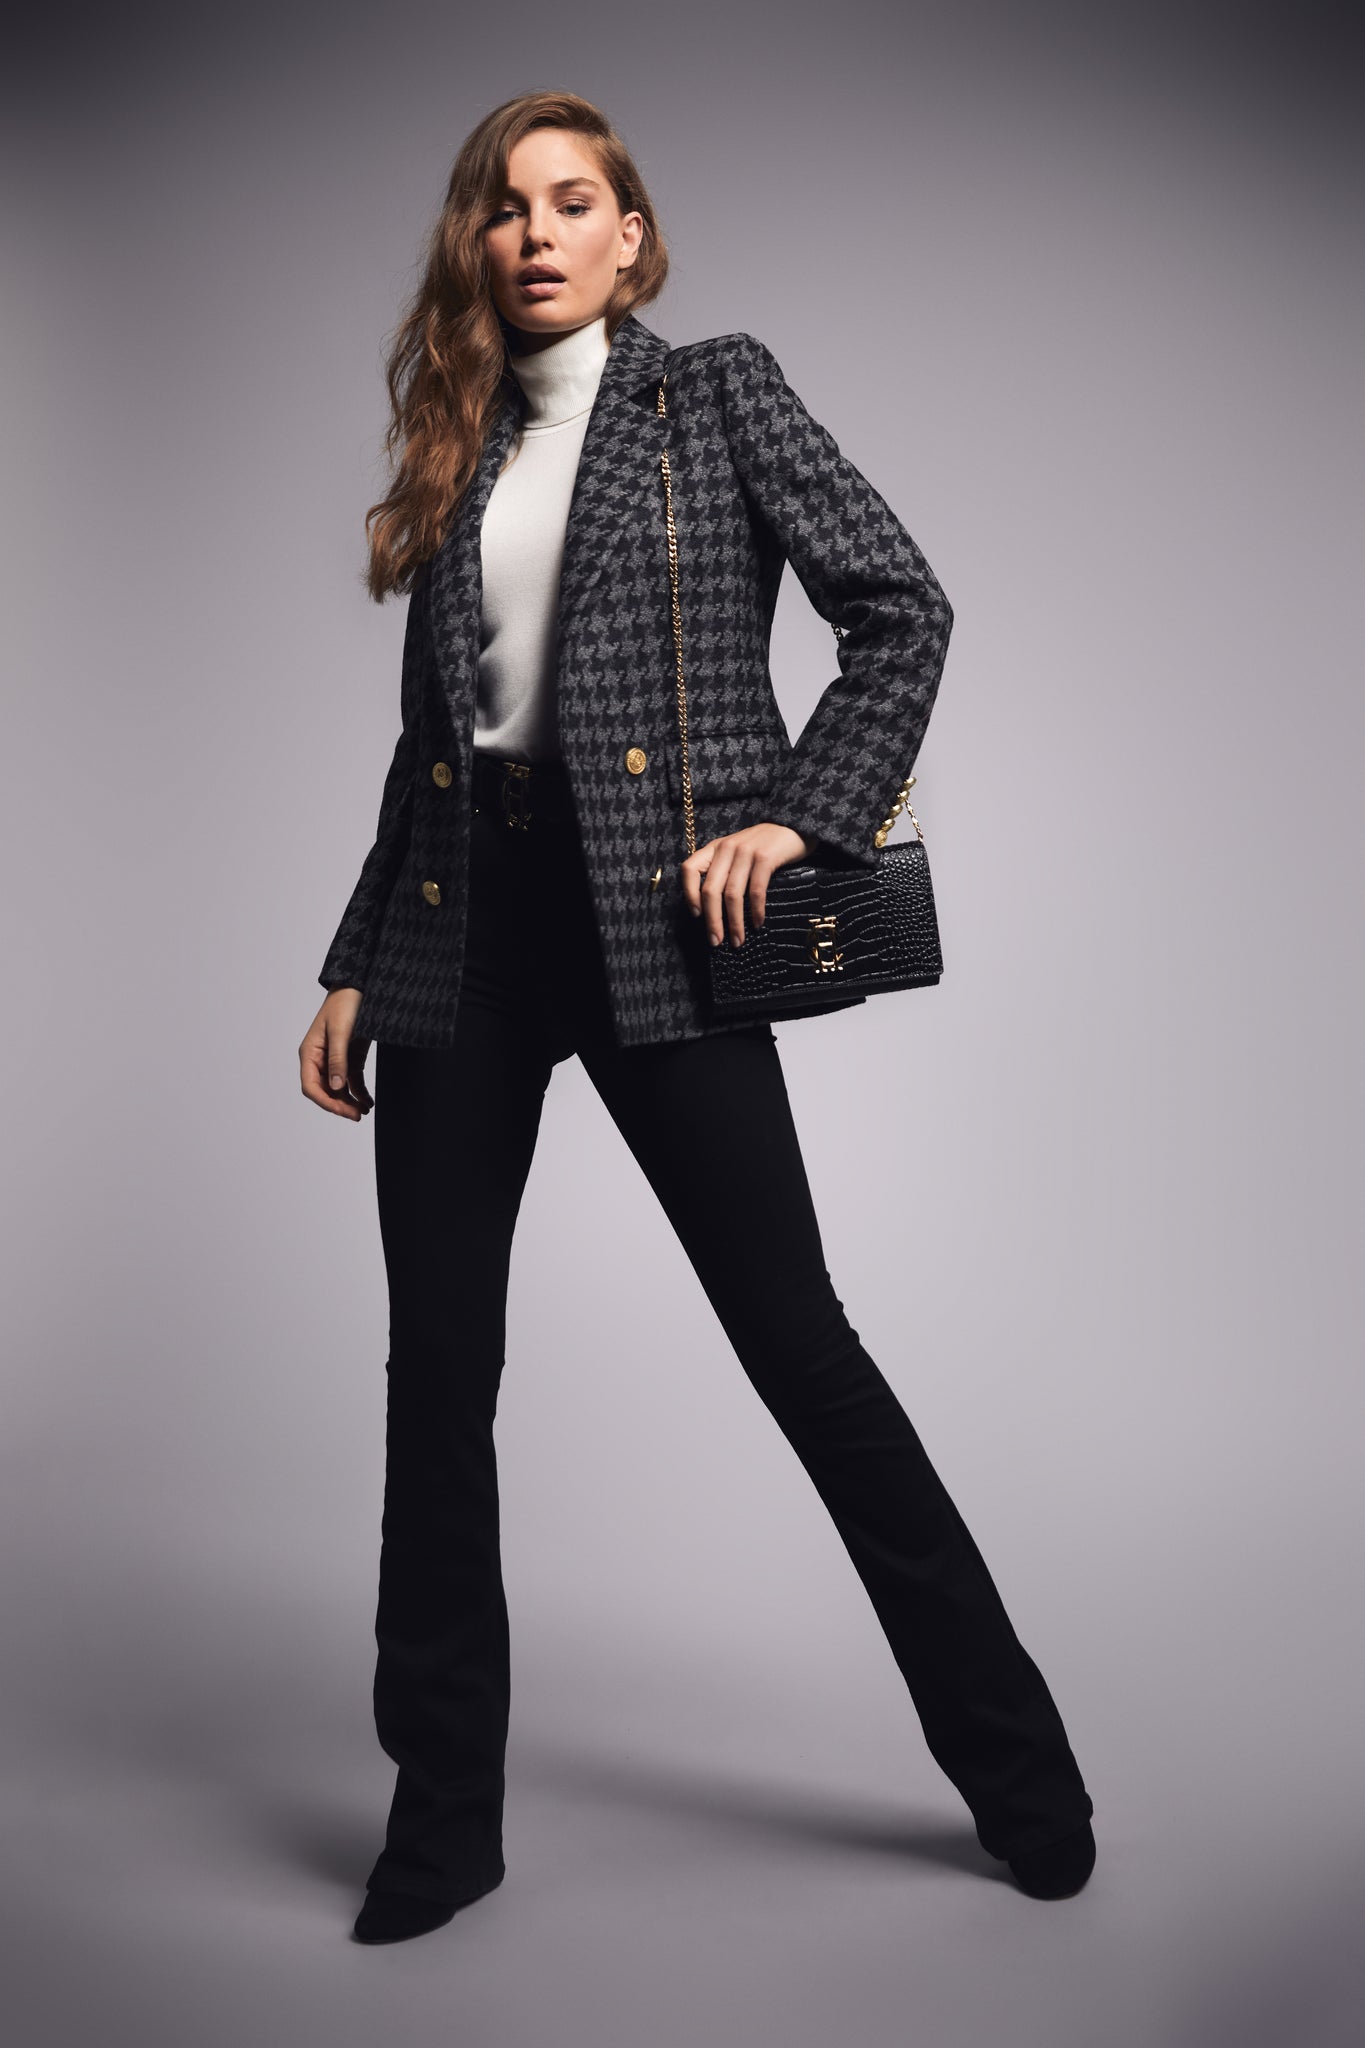 womens grey houndstooth tweed blazer with black flared jeans and black croc embossed leather clutch bag with gold hardware and gold chain 